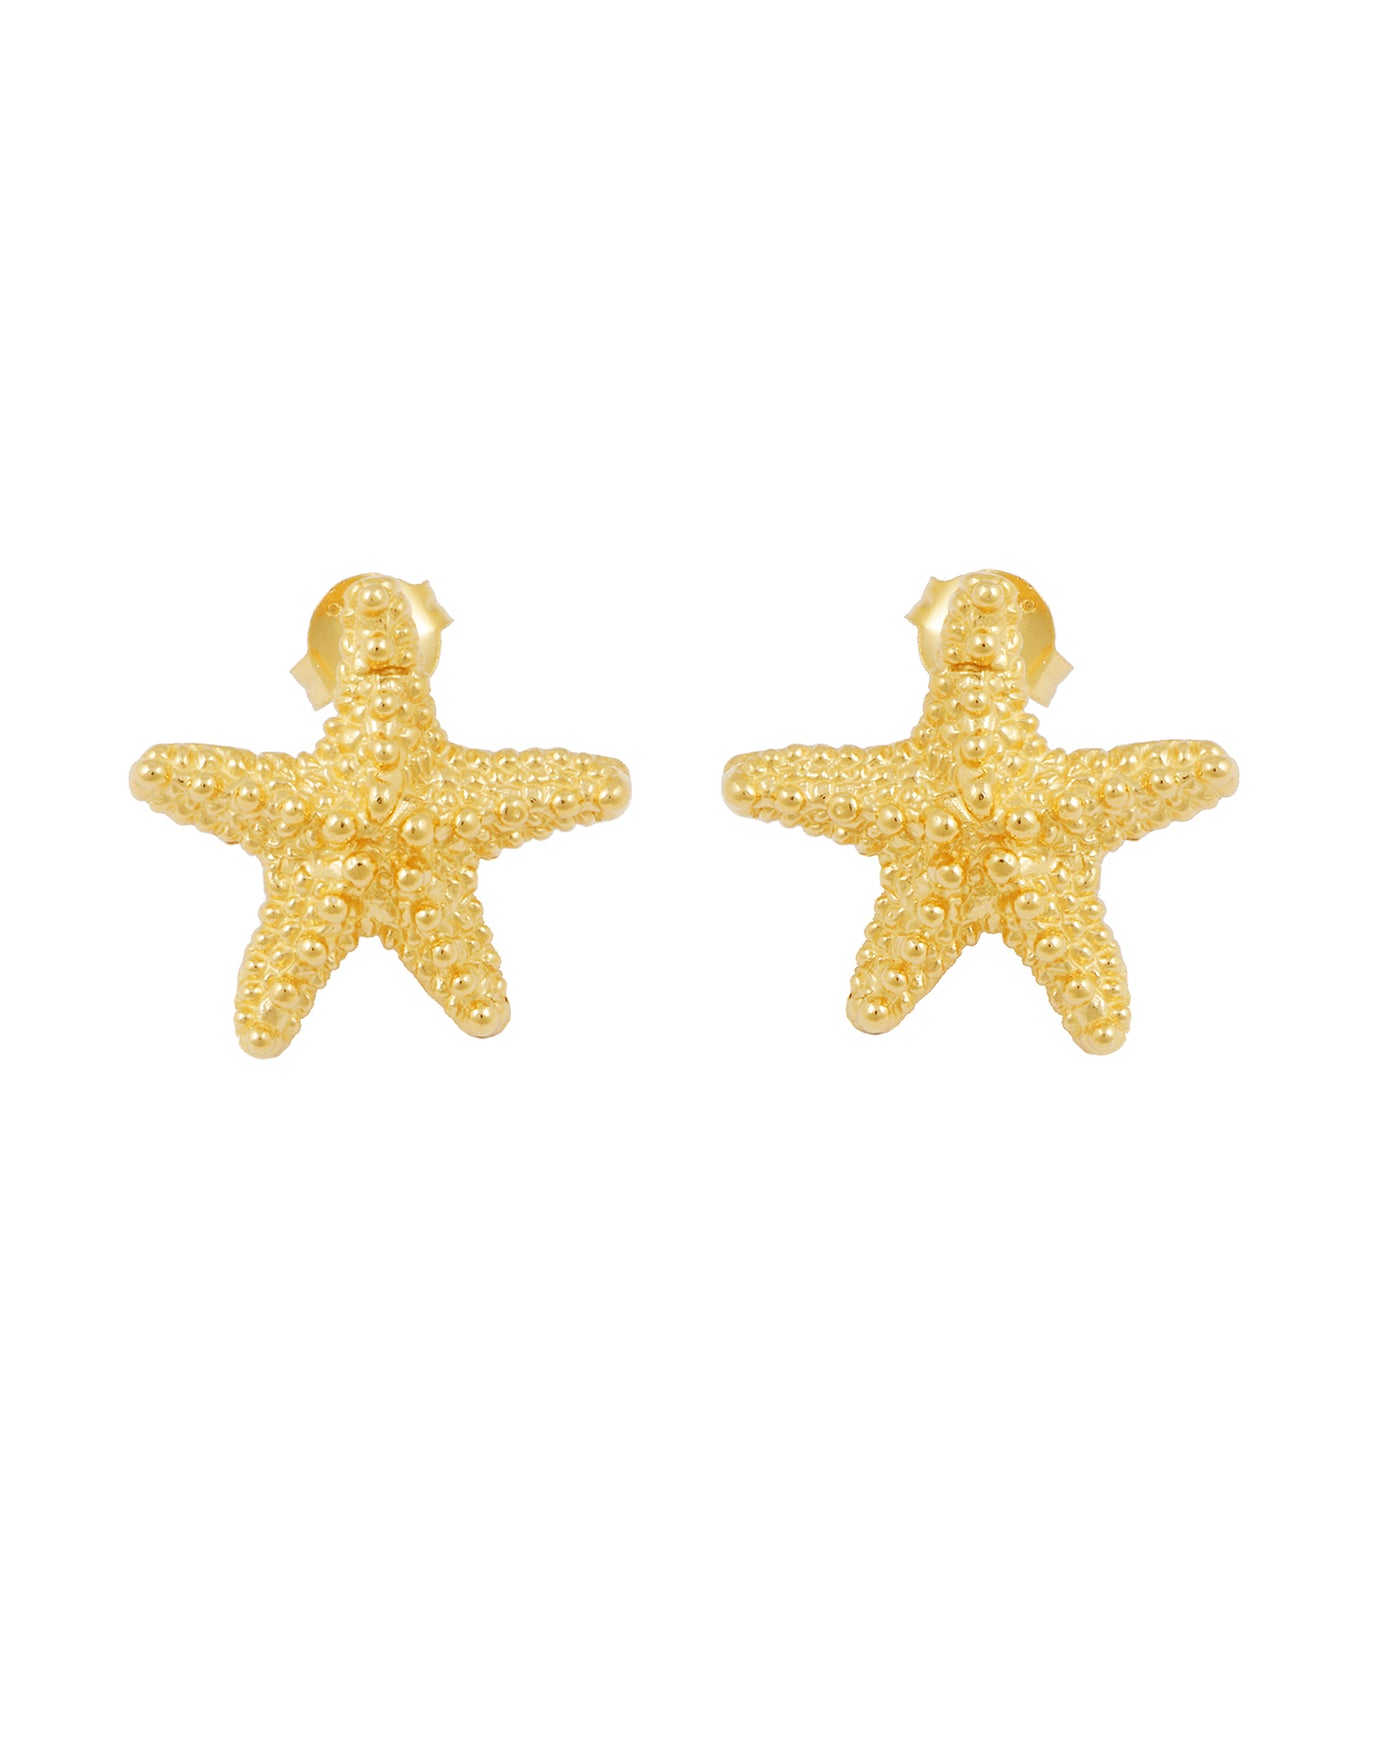 Sea Star stud earrings. Silver, gold-plated